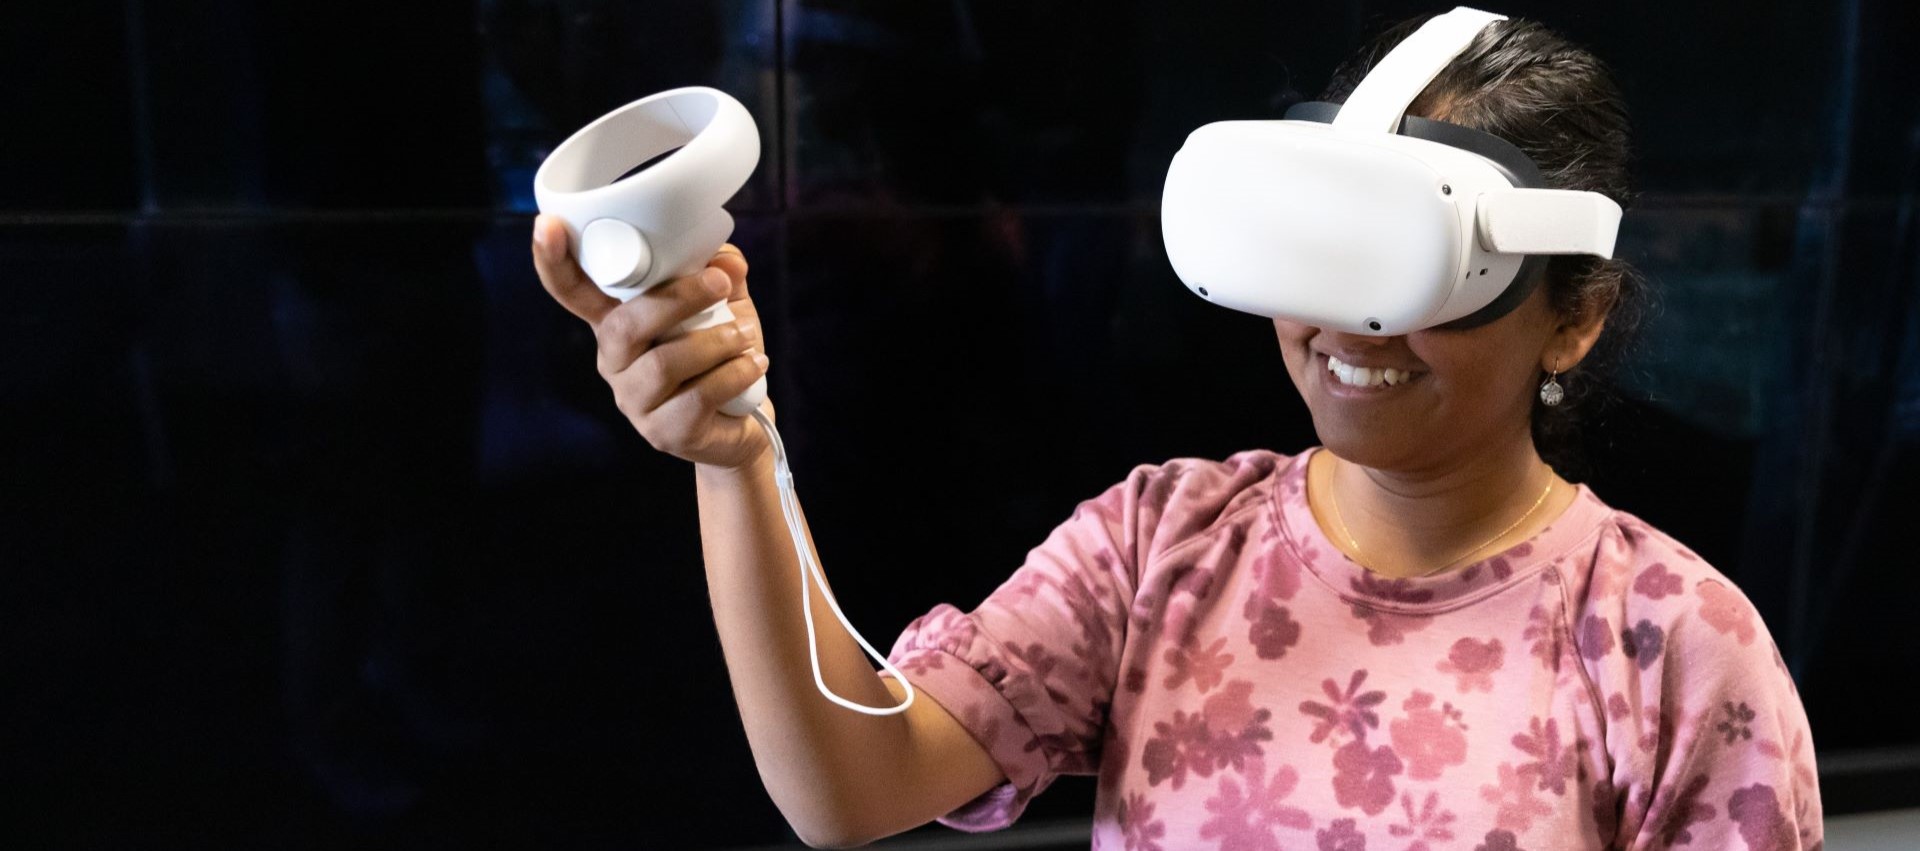 A woman is wearing a white virtual reality headset and holding a VR controller in her right hand. She is smiling and appears to be enjoying the VR experience. She is dressed in a pink floral-patterned top and is standing against a dark background.